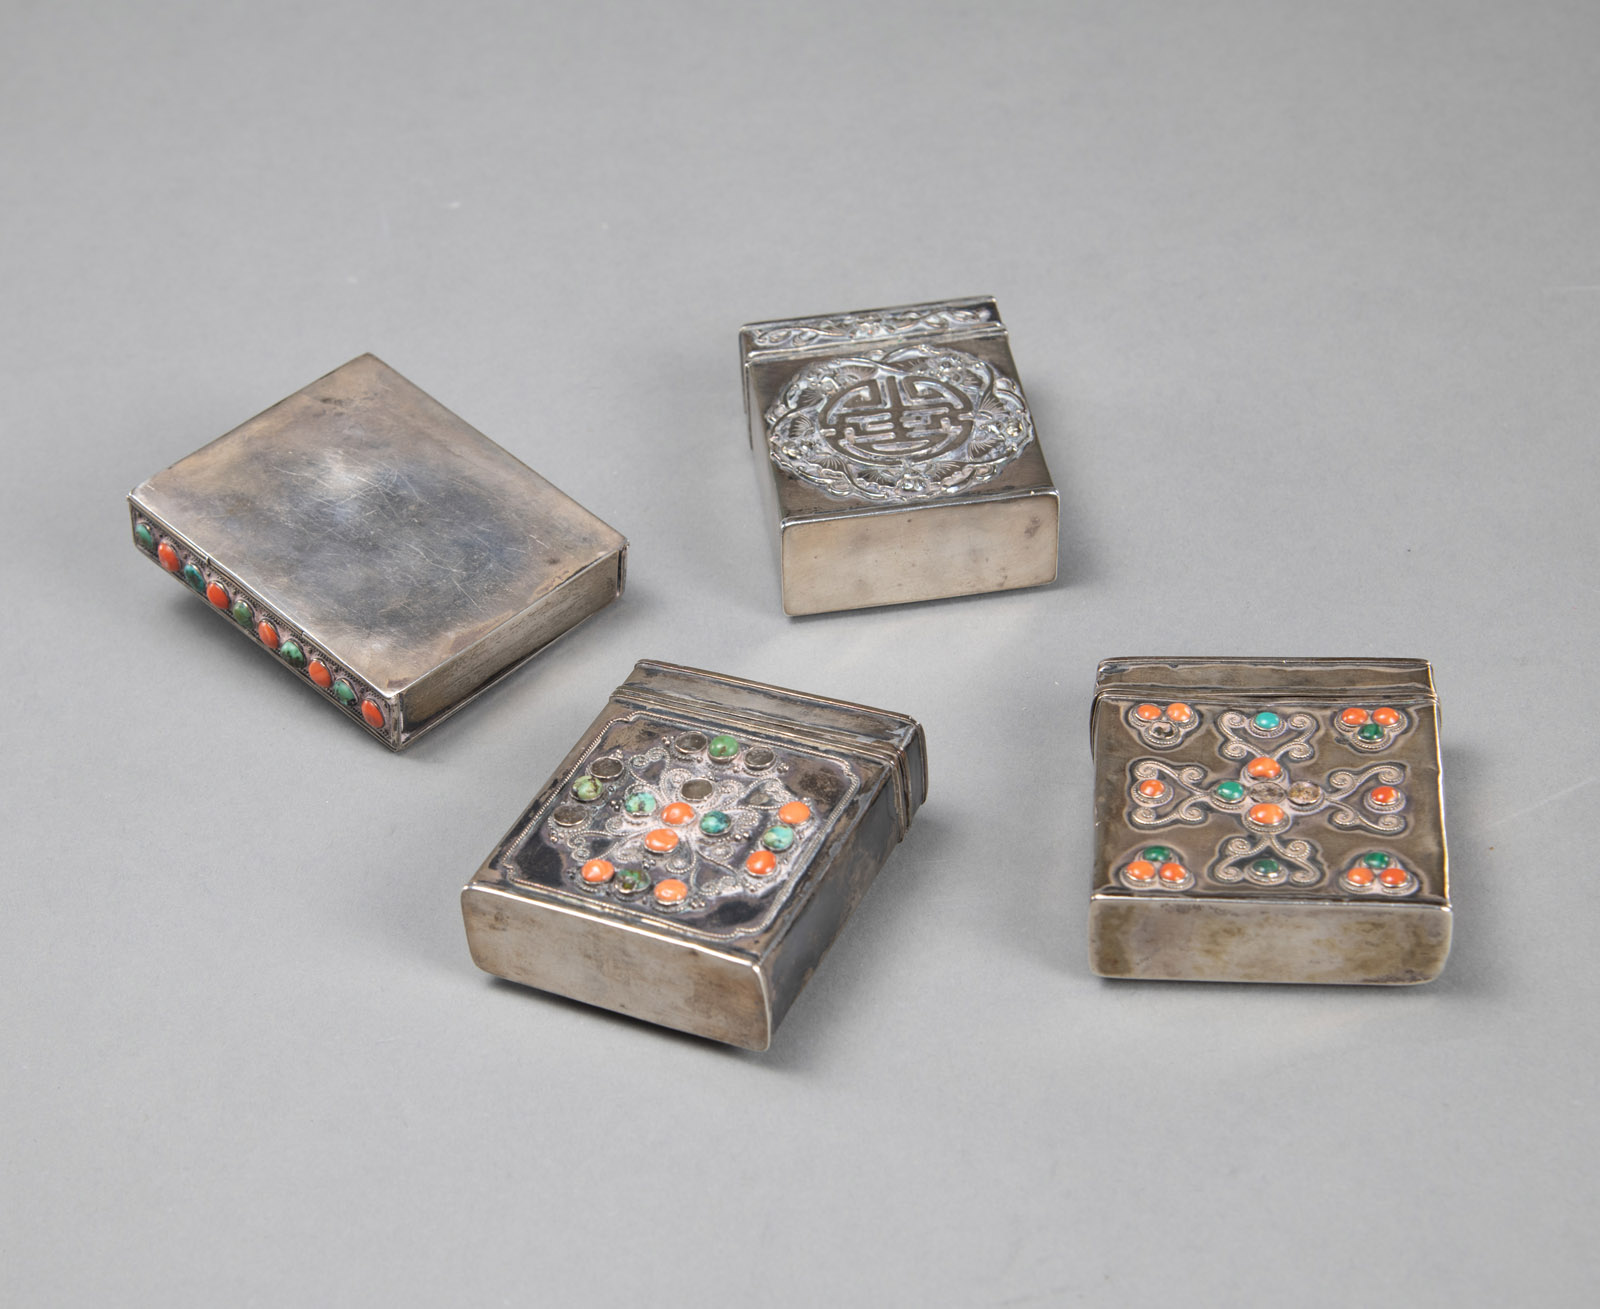 FOUR PARTIALLY CORAL- AND TURQUOISE-INLAID METAL BOXES - Image 3 of 3